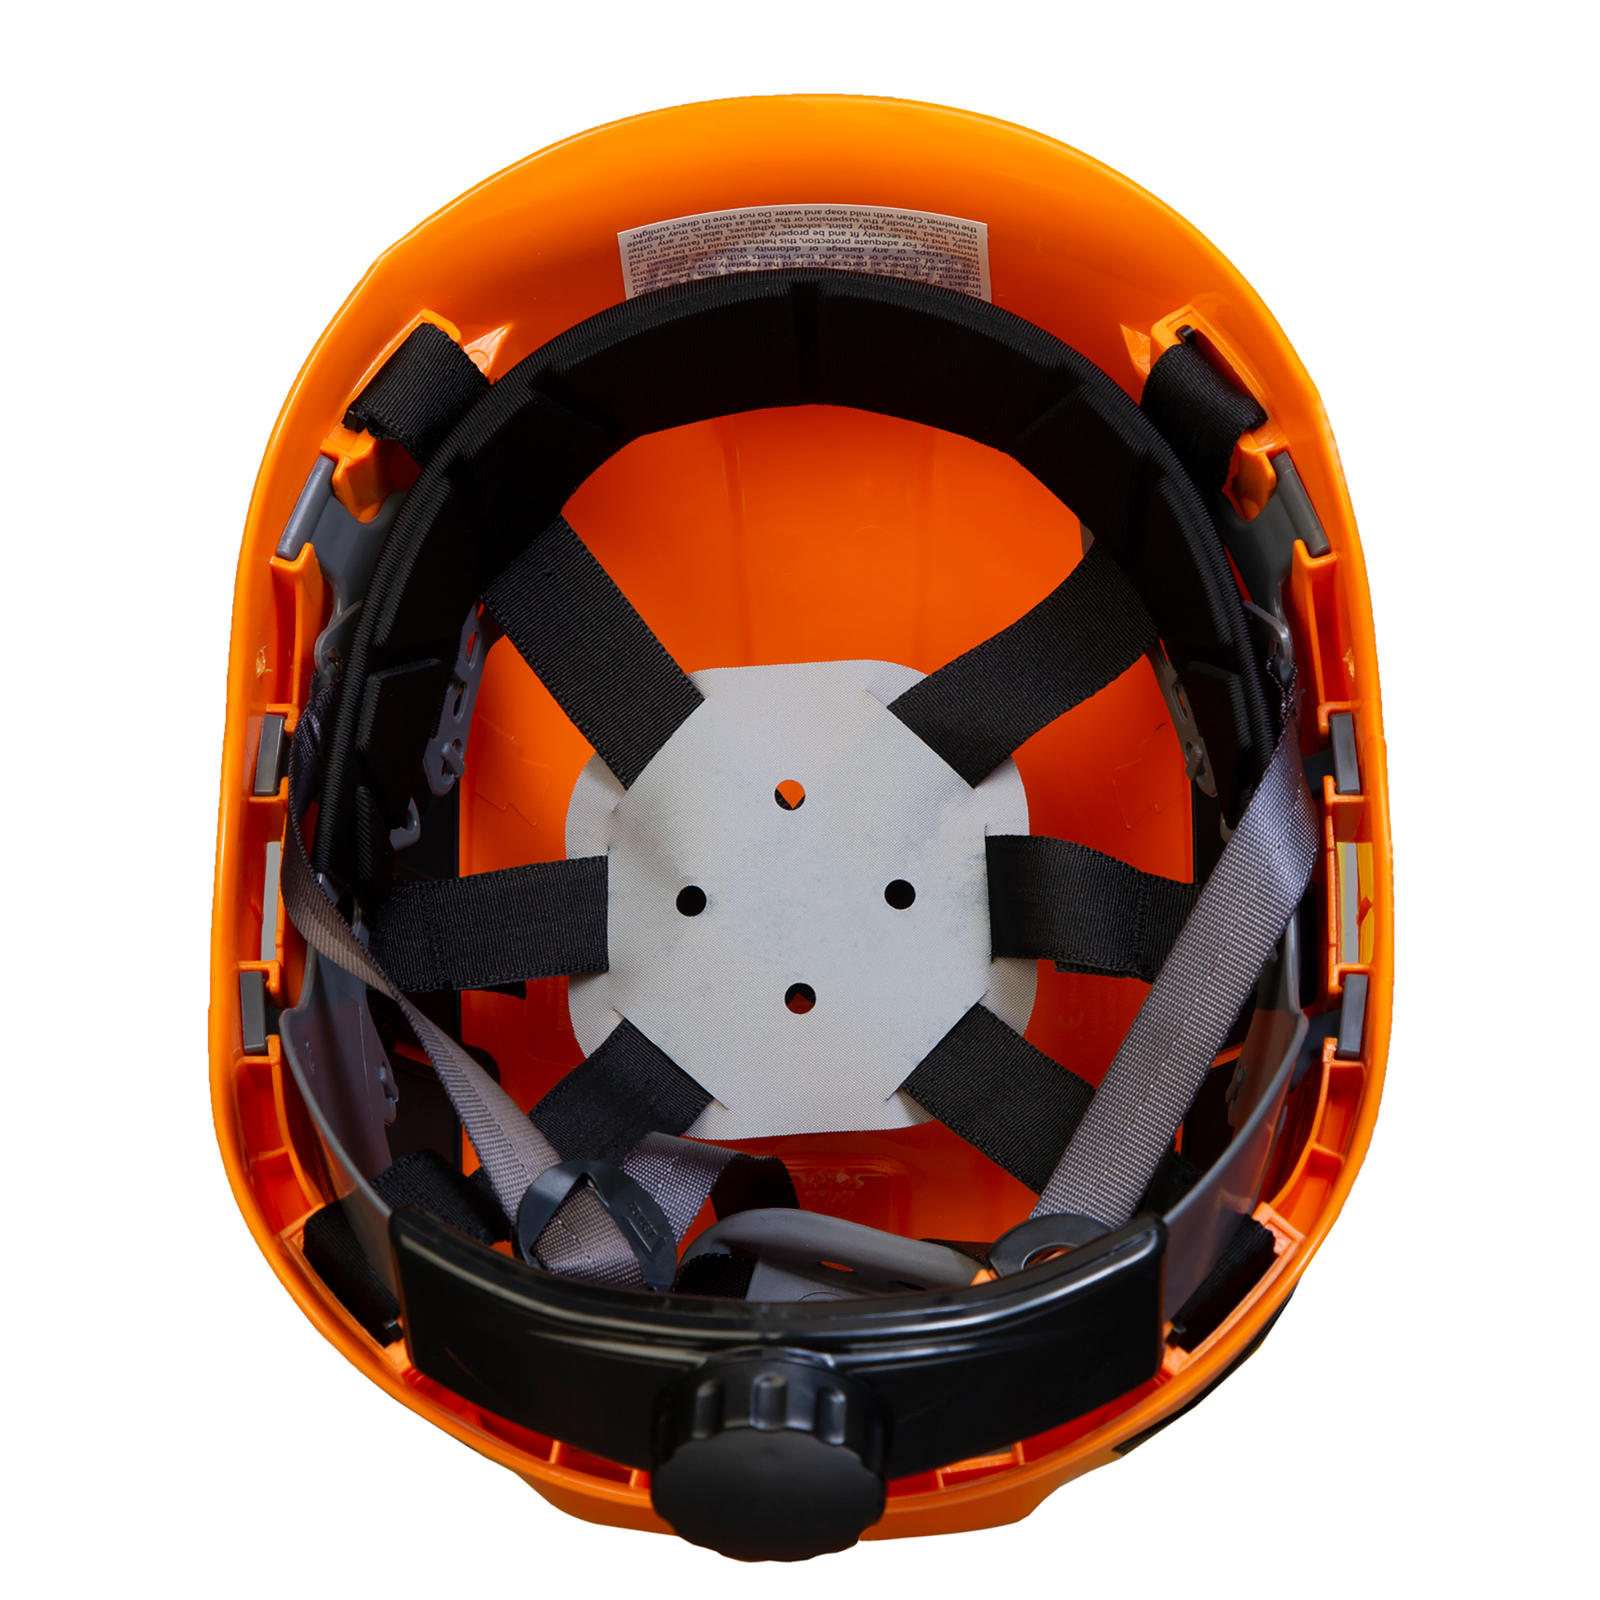 Bottom view of the Jorestech orange ventilated hard hat with adjustable 6 point suspension. The suspension is installed inside de hard had shell.